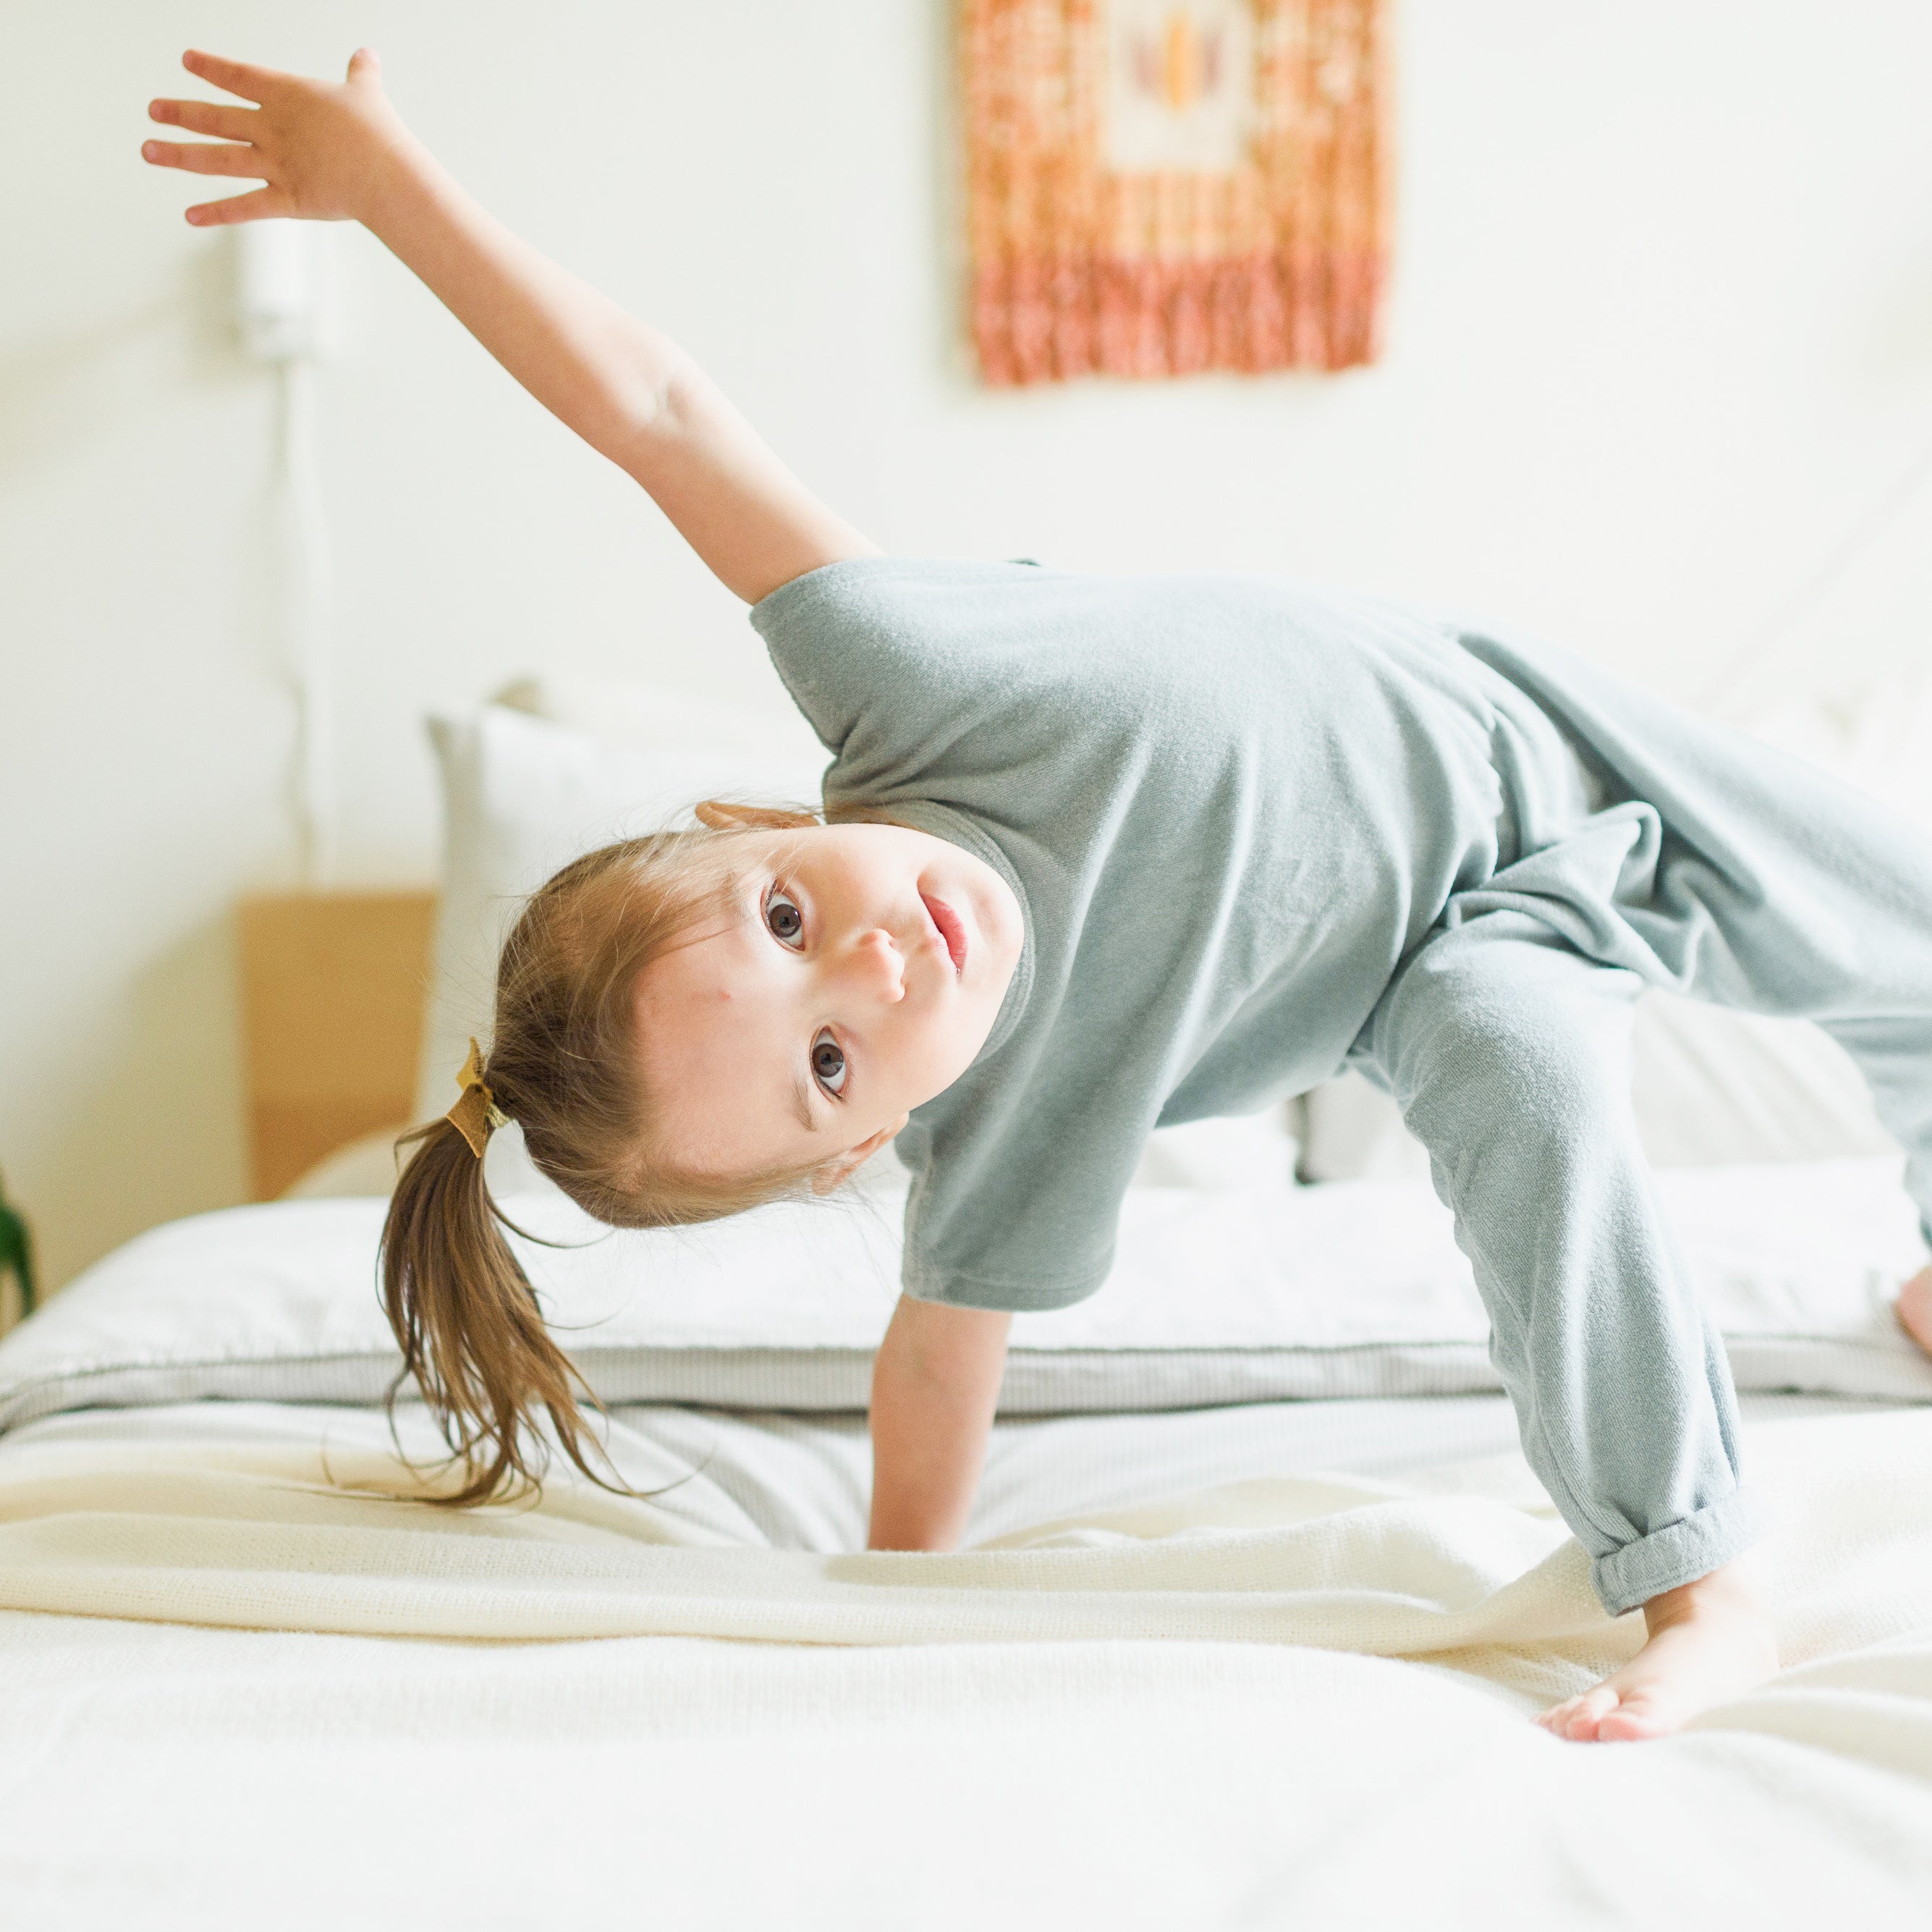 Child Playing on a Clean bed after it has been cleaned and washed with AspenClean green cleaners